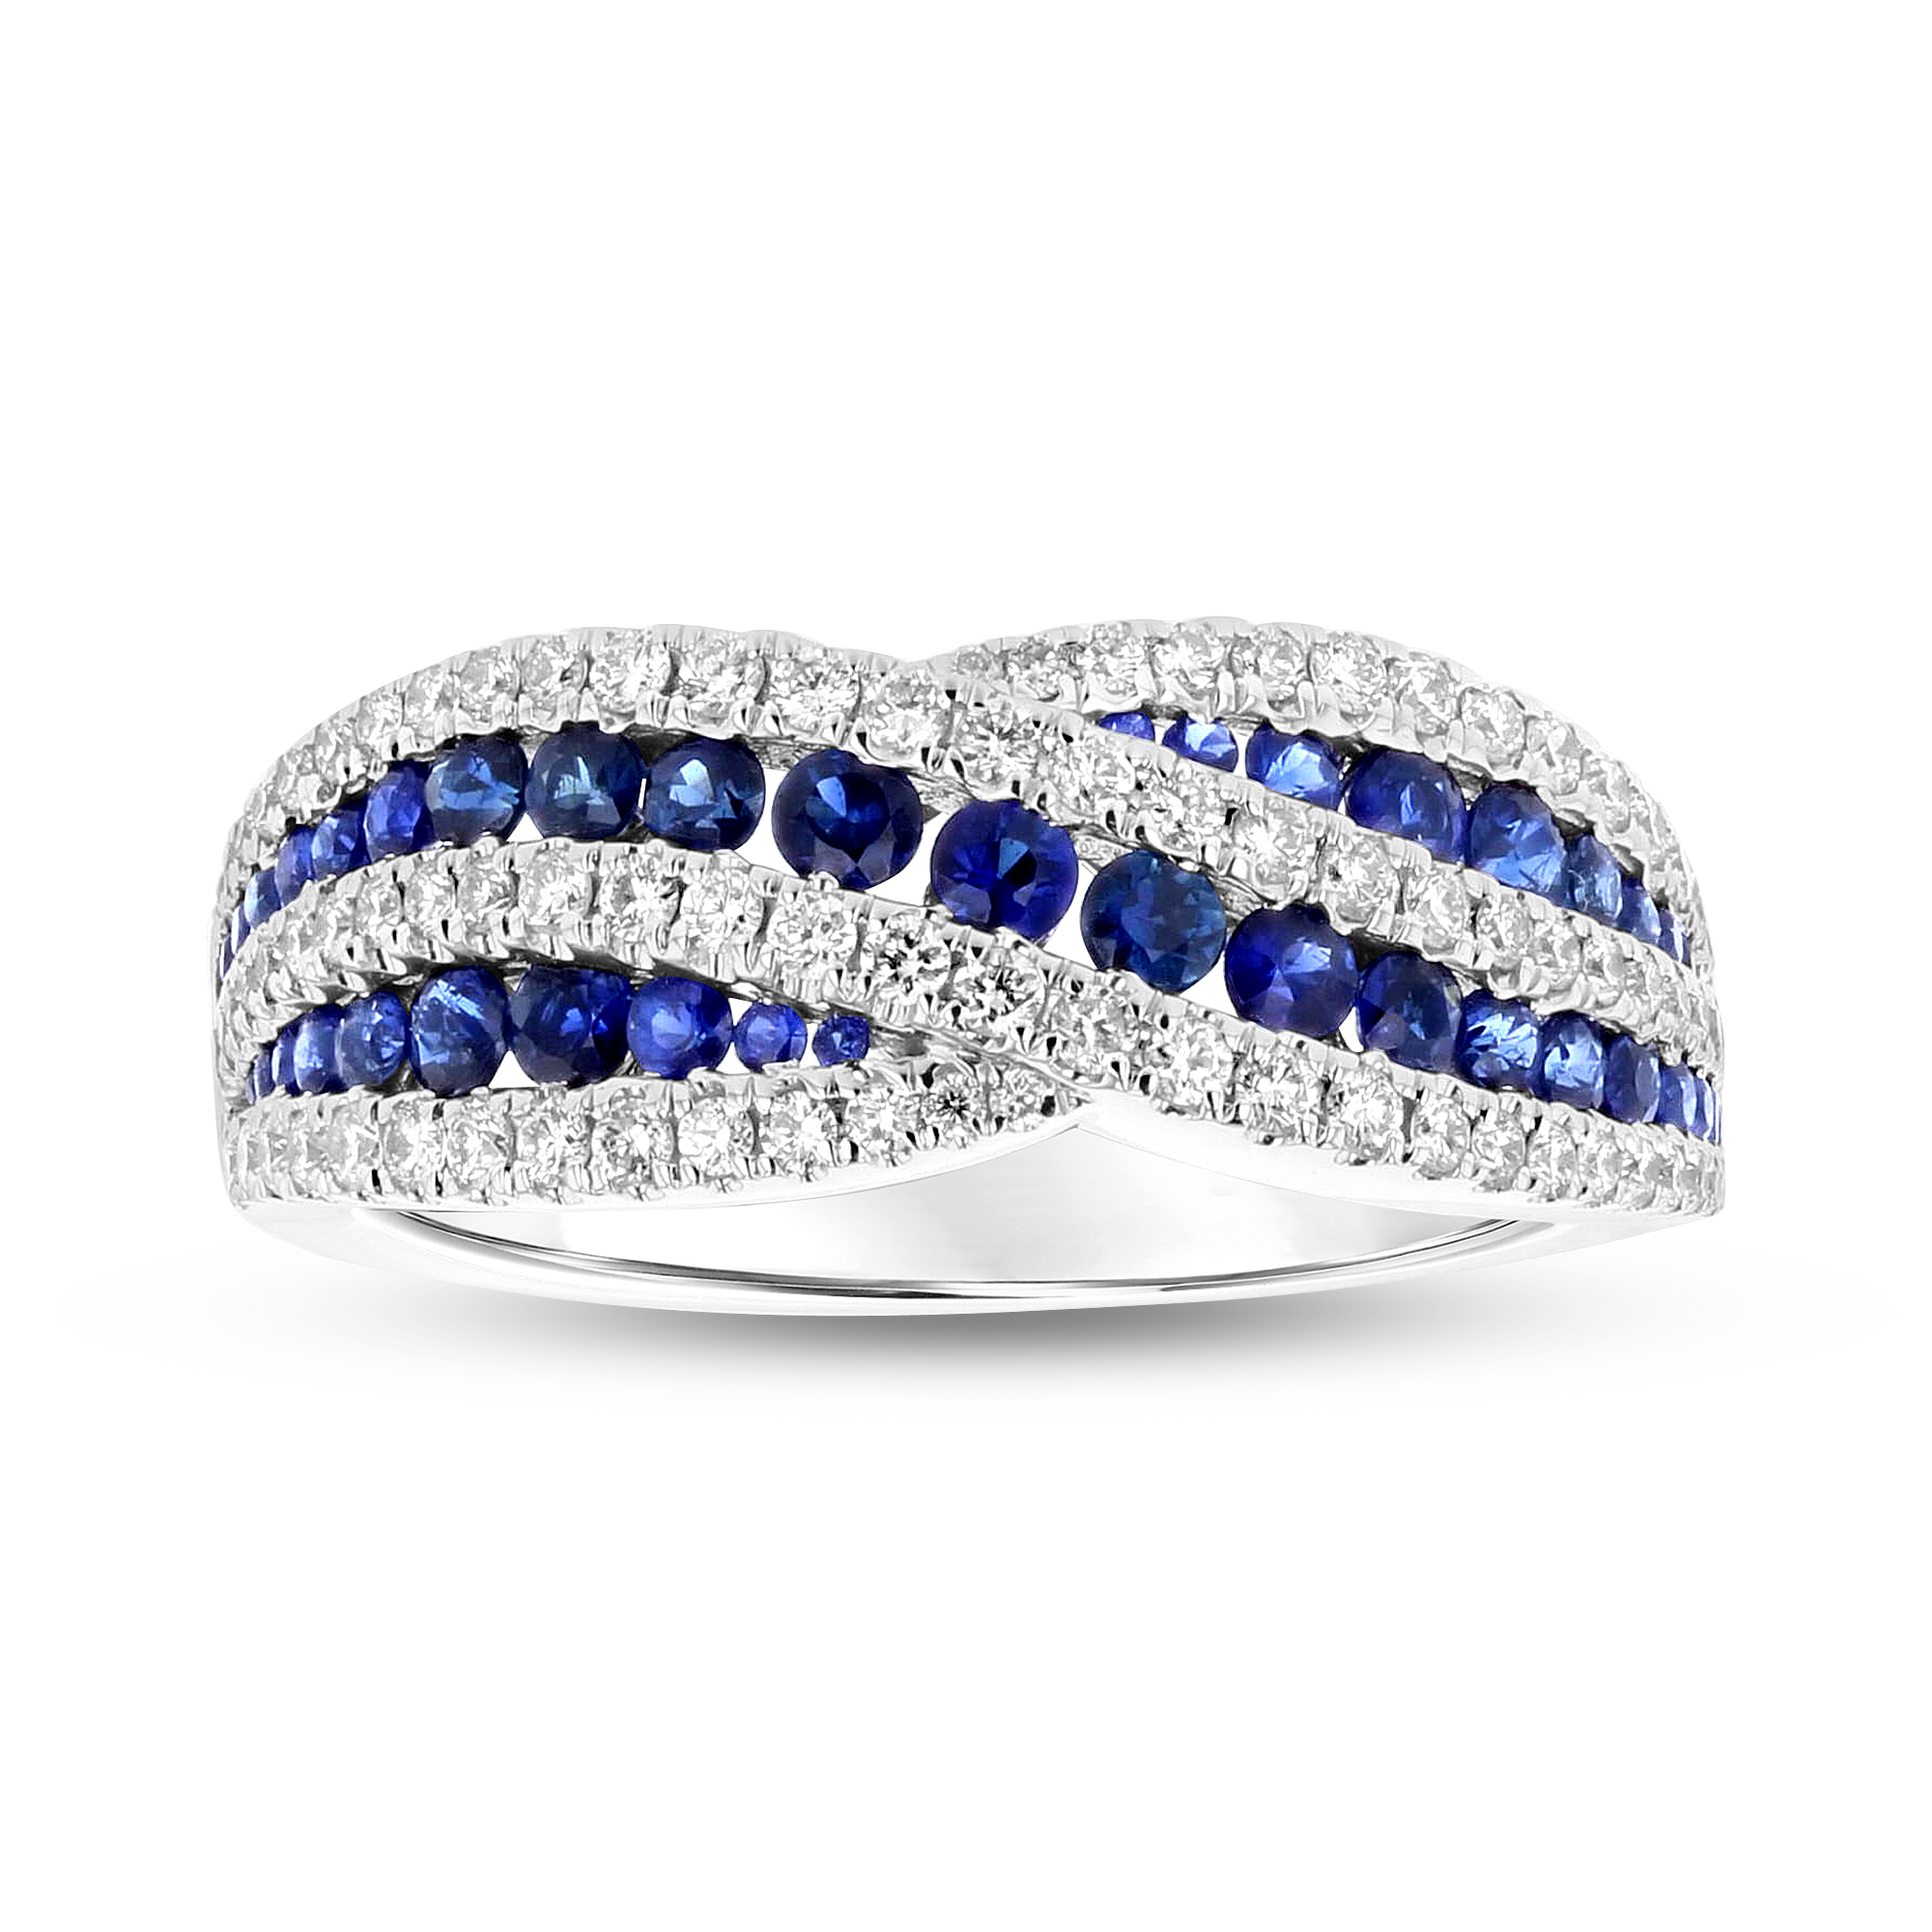 1.33ctw Diamond and Sapphire Ring in 18k White Gold